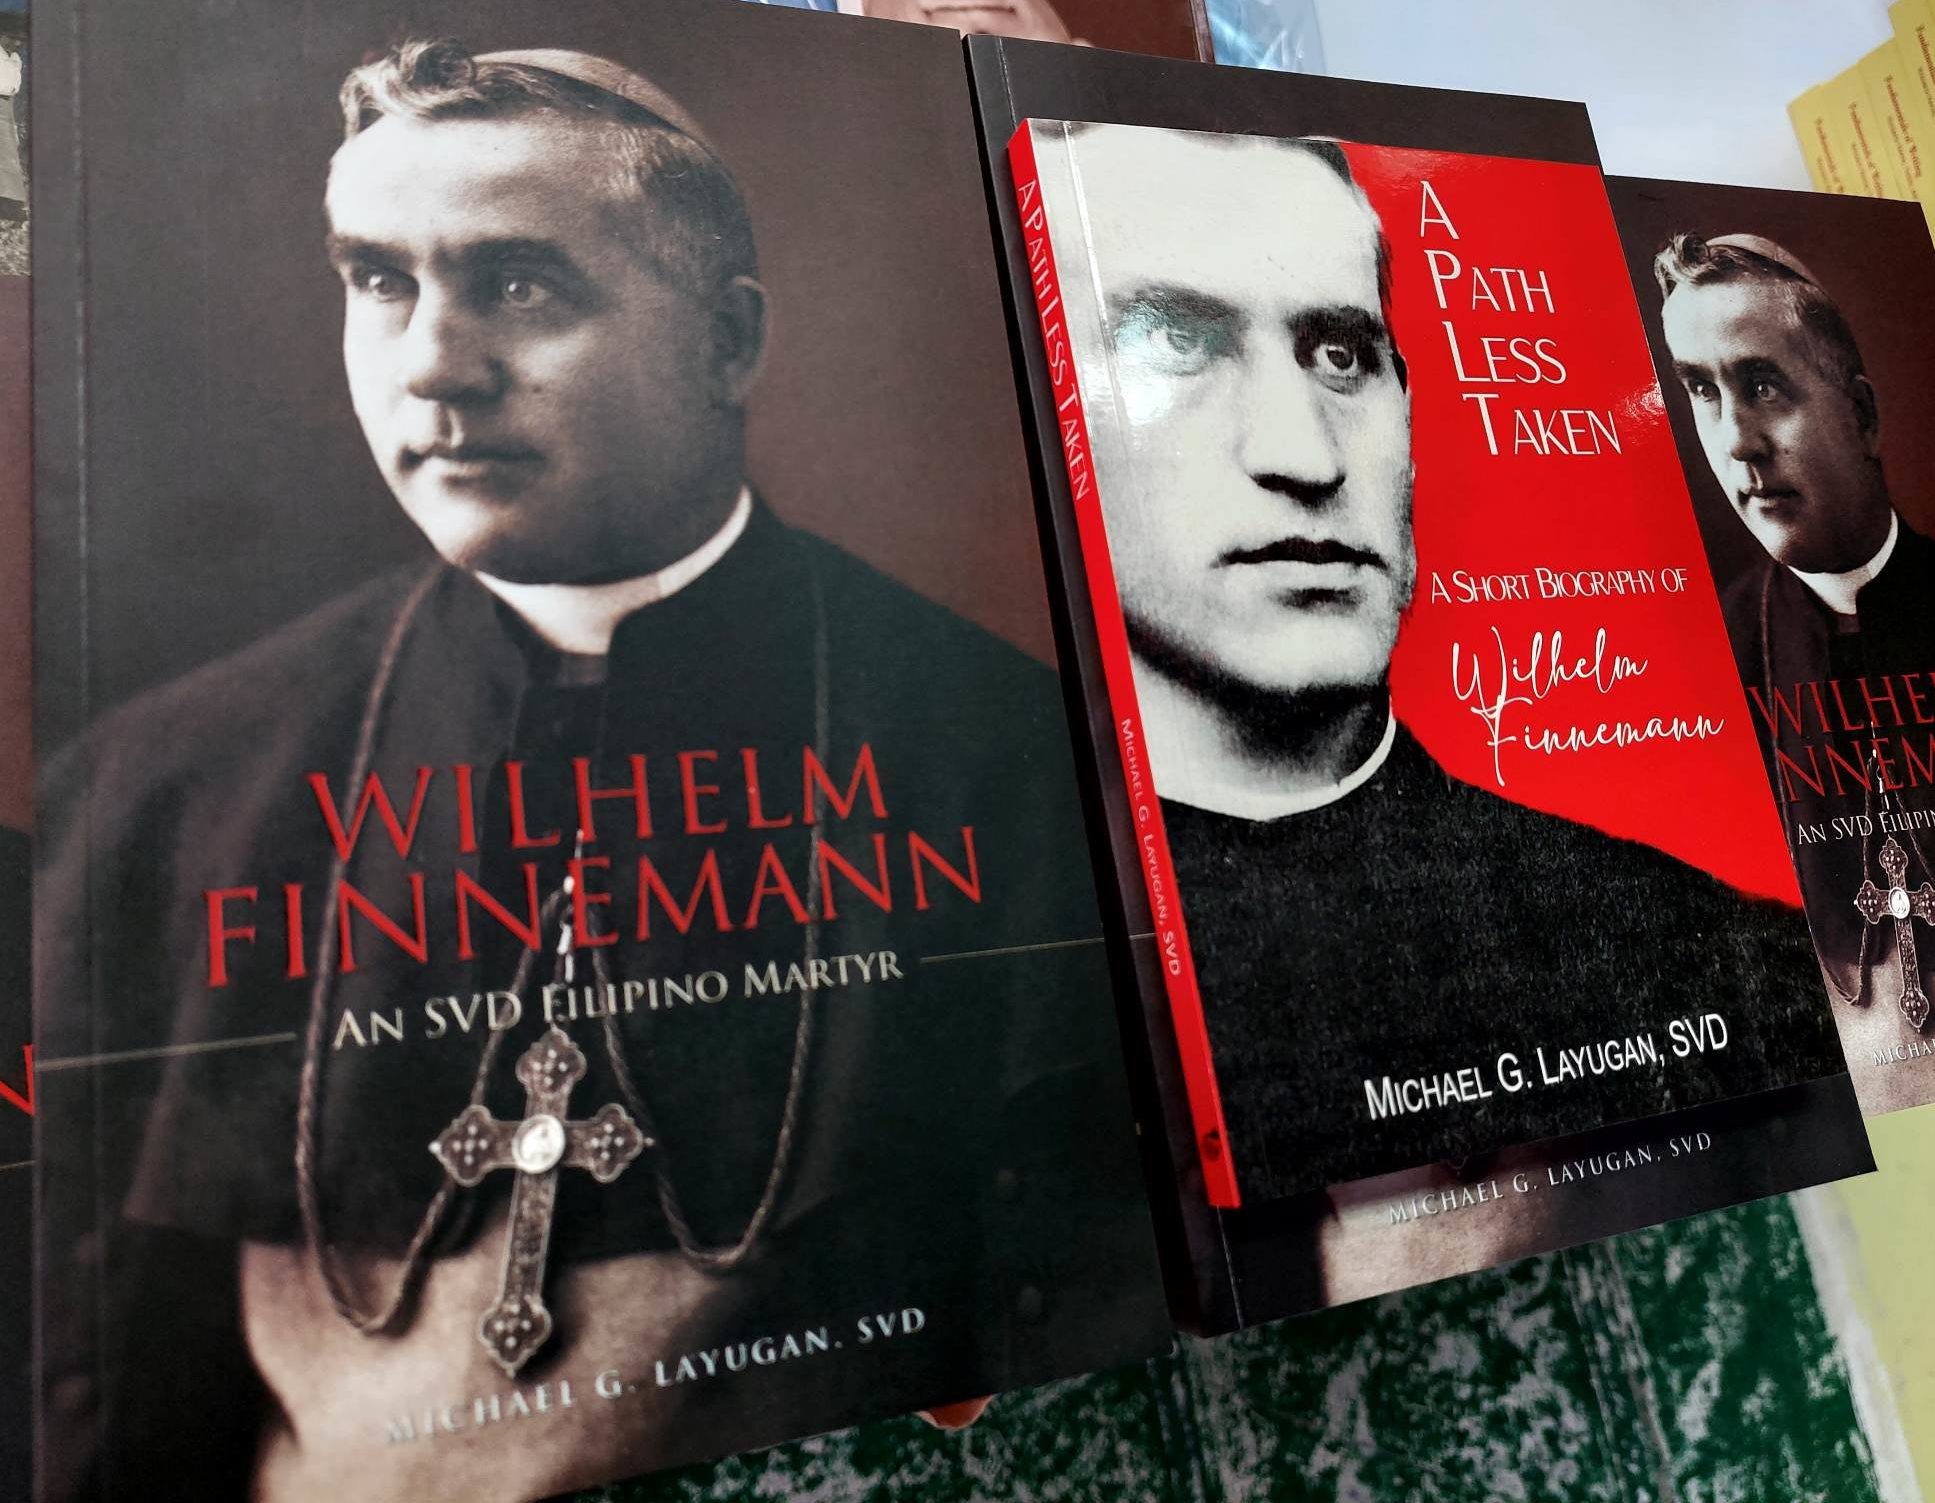 The Society of the Divine Word (SVD) on Thursday (Jan. 12) launched a book titled, "Wilhelm Finnemann: An SVD Filipino Martyr" with its author Fr. Michael Layugan at Divine Word College in Calapan